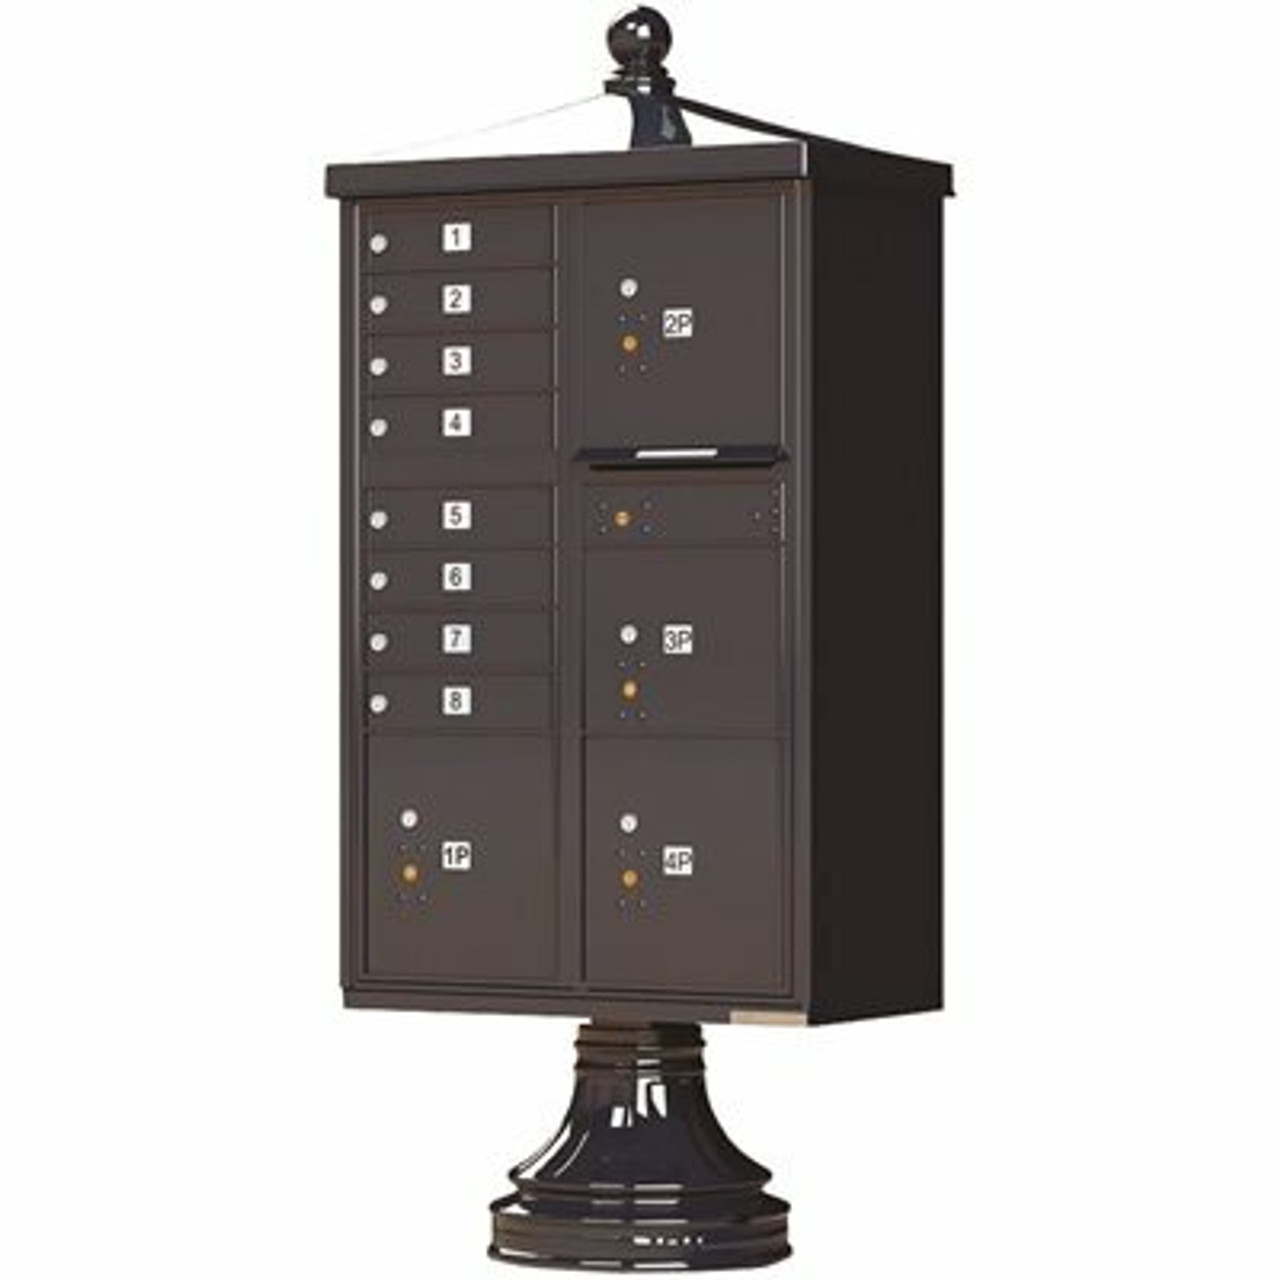 Florence 1570 Series 8-Mailboxes, 1-Outgoing, 4-Parcel Lockers, Vital Cluster Box Unit With Vogue Traditional Accessories - 2474381